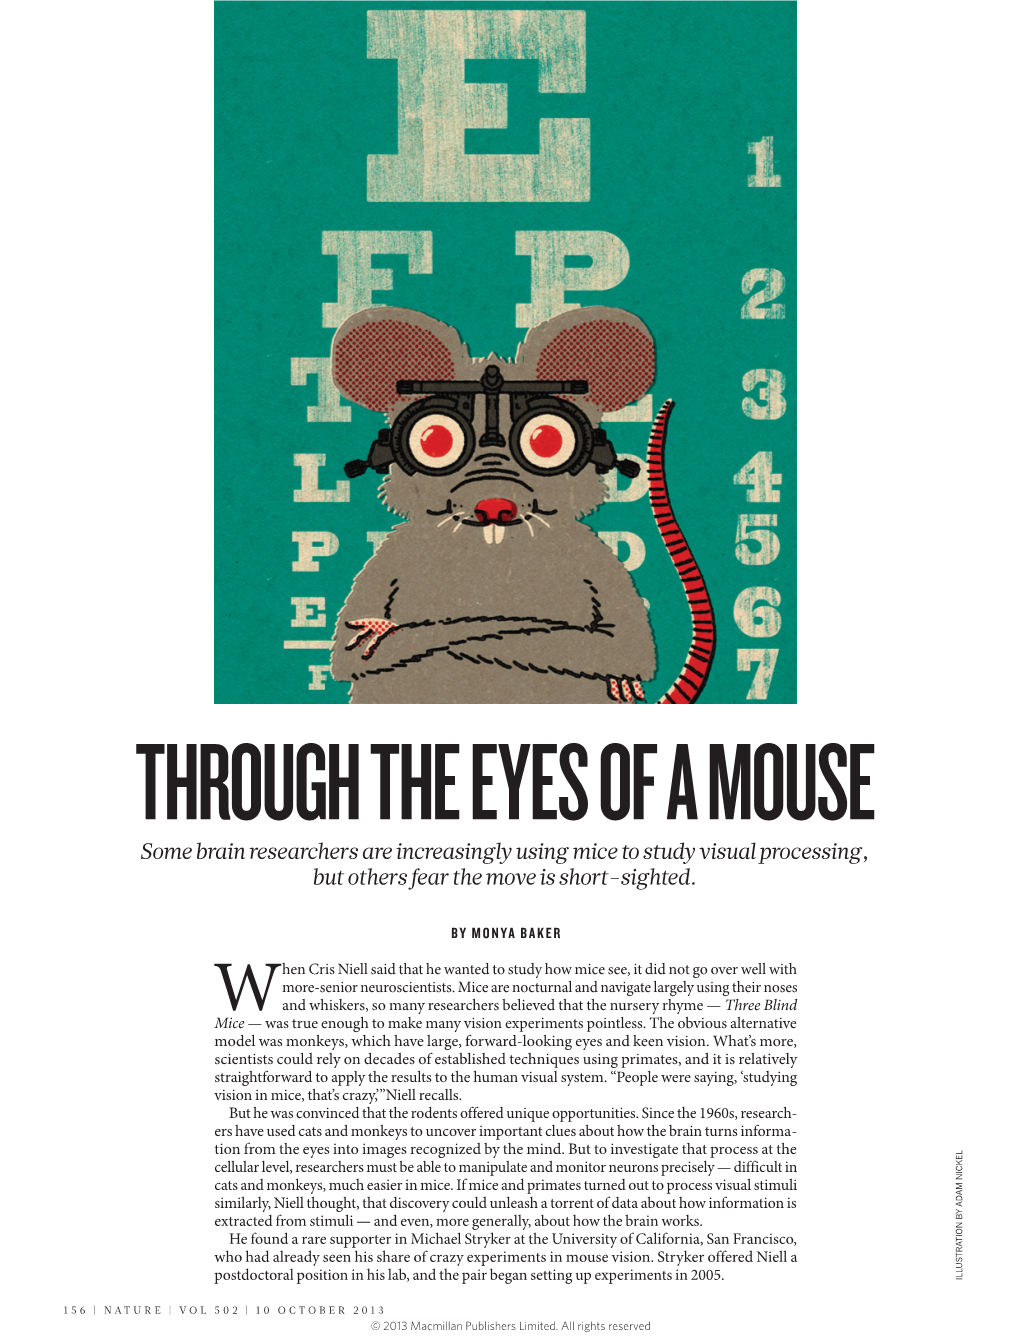 THROUGH the EYES of a MOUSE Some Brain Researchers Are Increasingly Using Mice to Study Visual Processing, but Others Fear the Move Is Short-Sighted